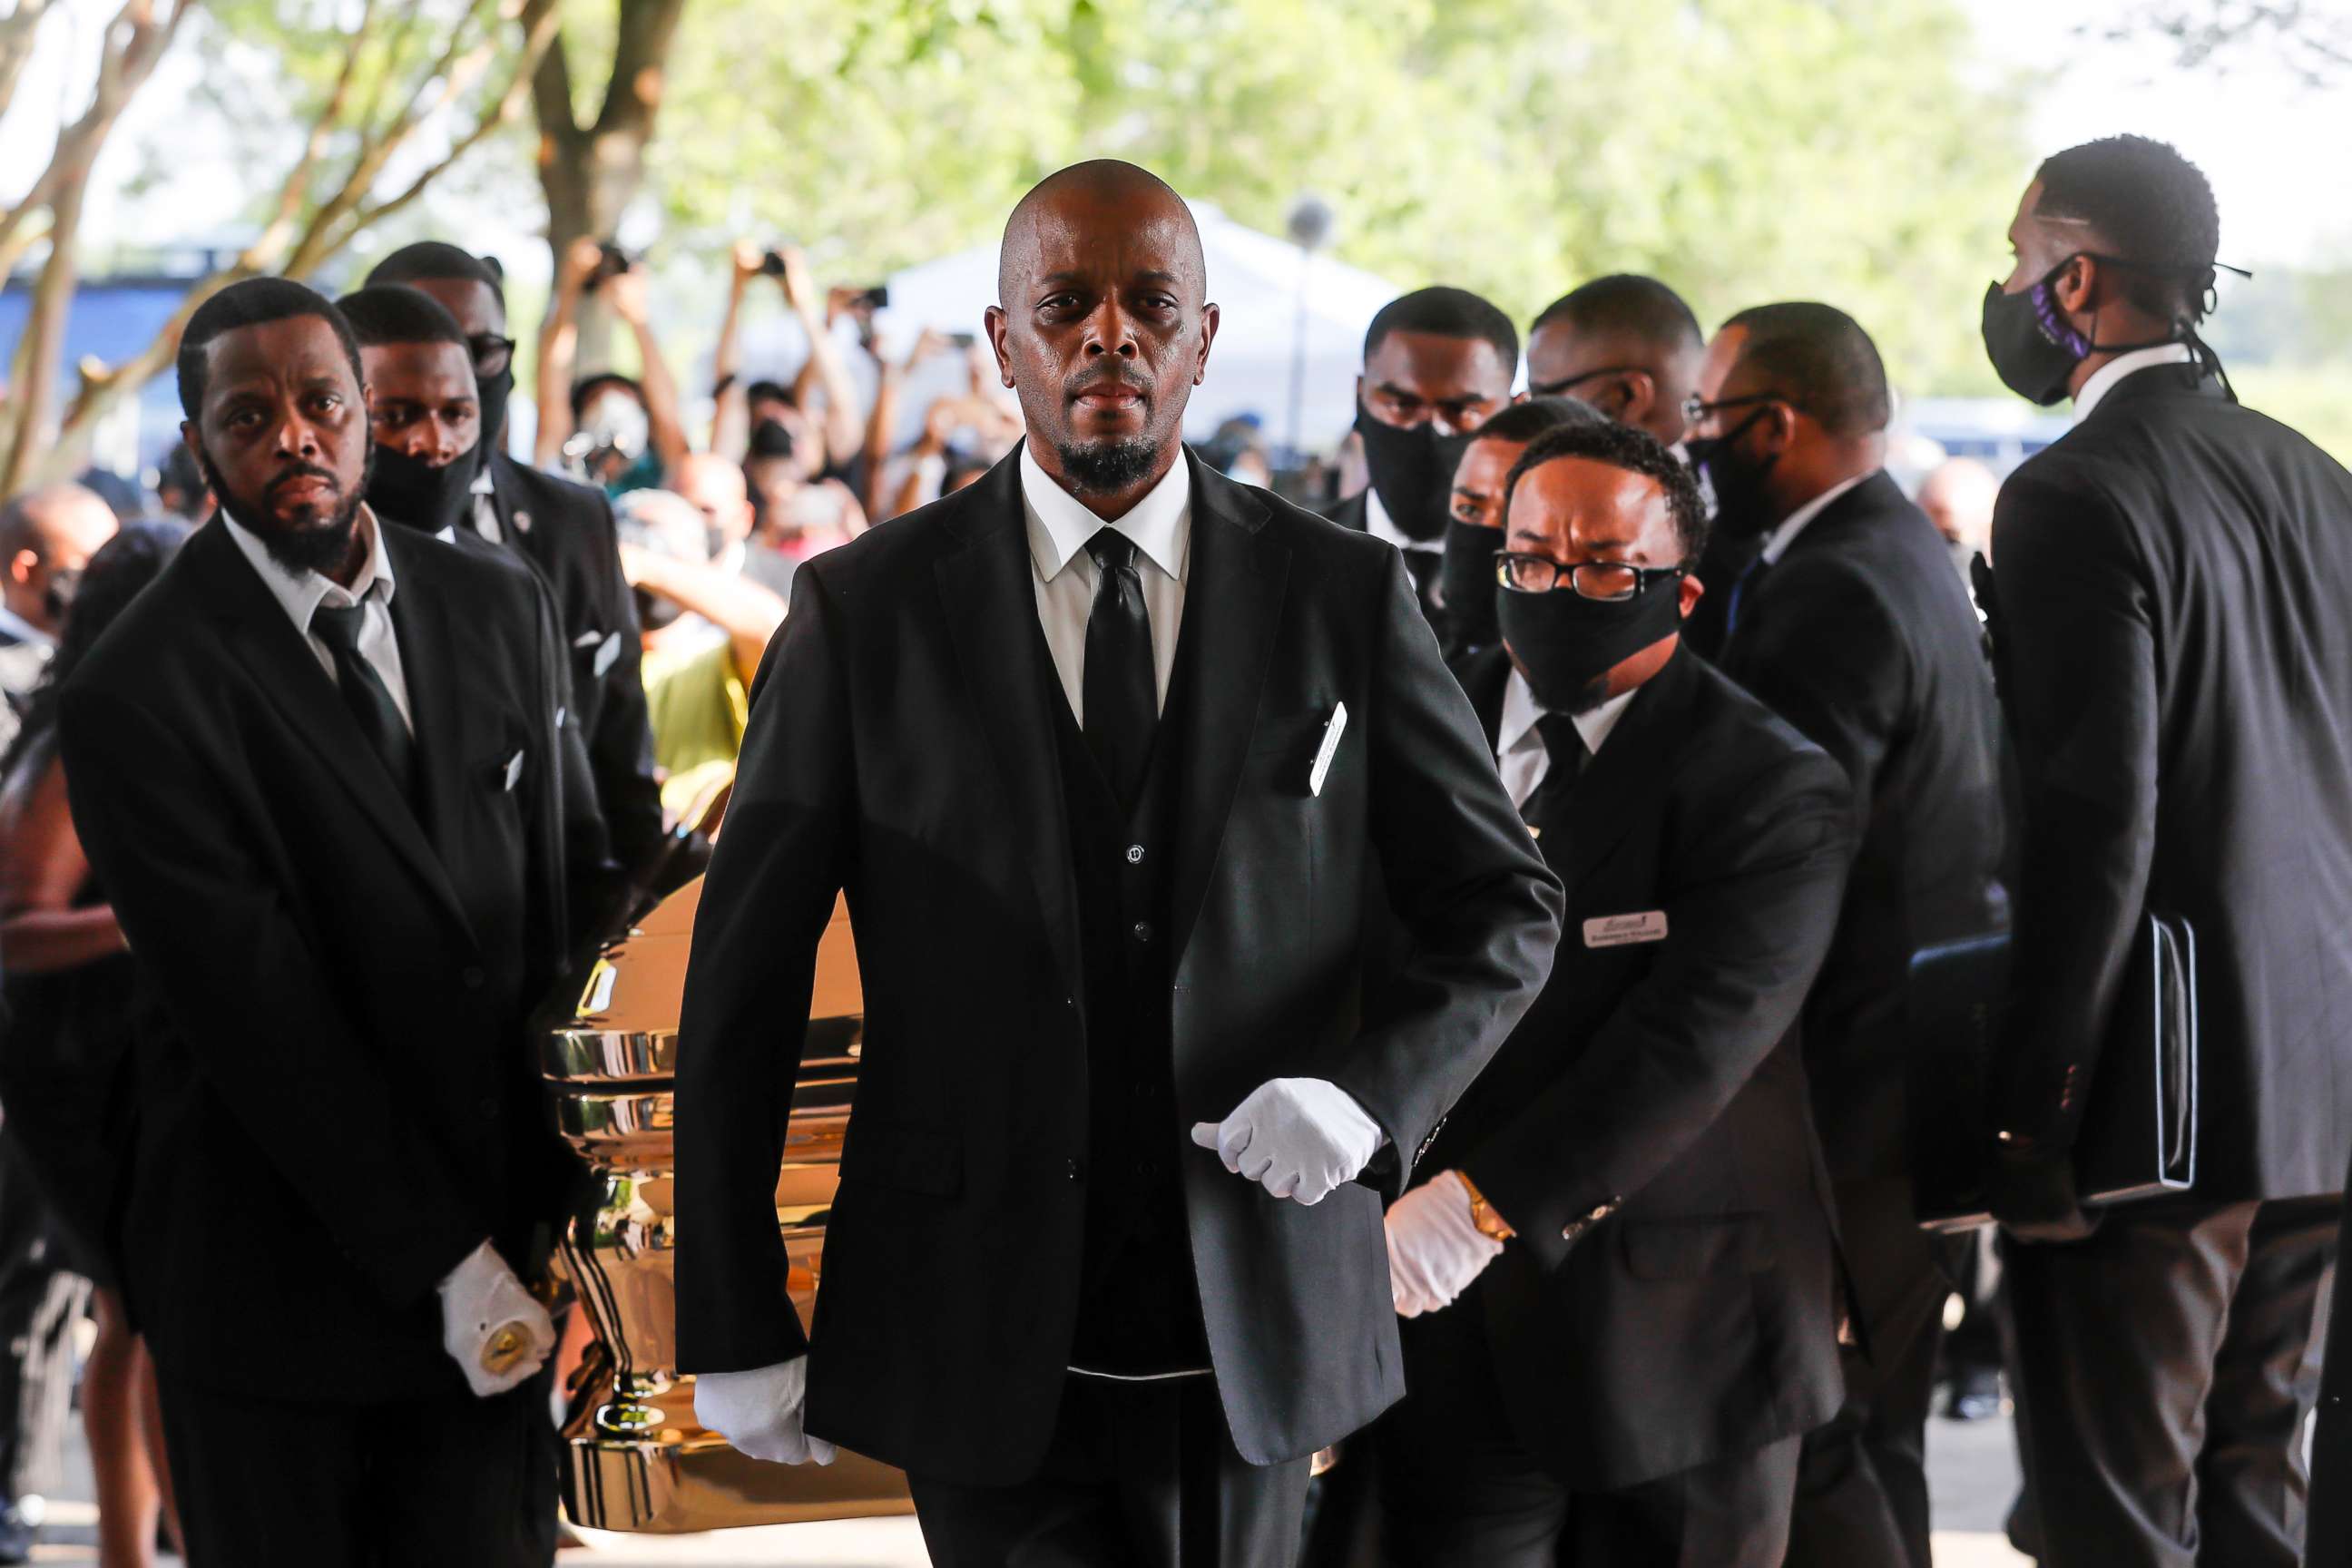 PHOTO: Pallbearers bring the coffin into The Fountain of Praise church in Houston for the funeral for George Floyd on June 9, 2020.